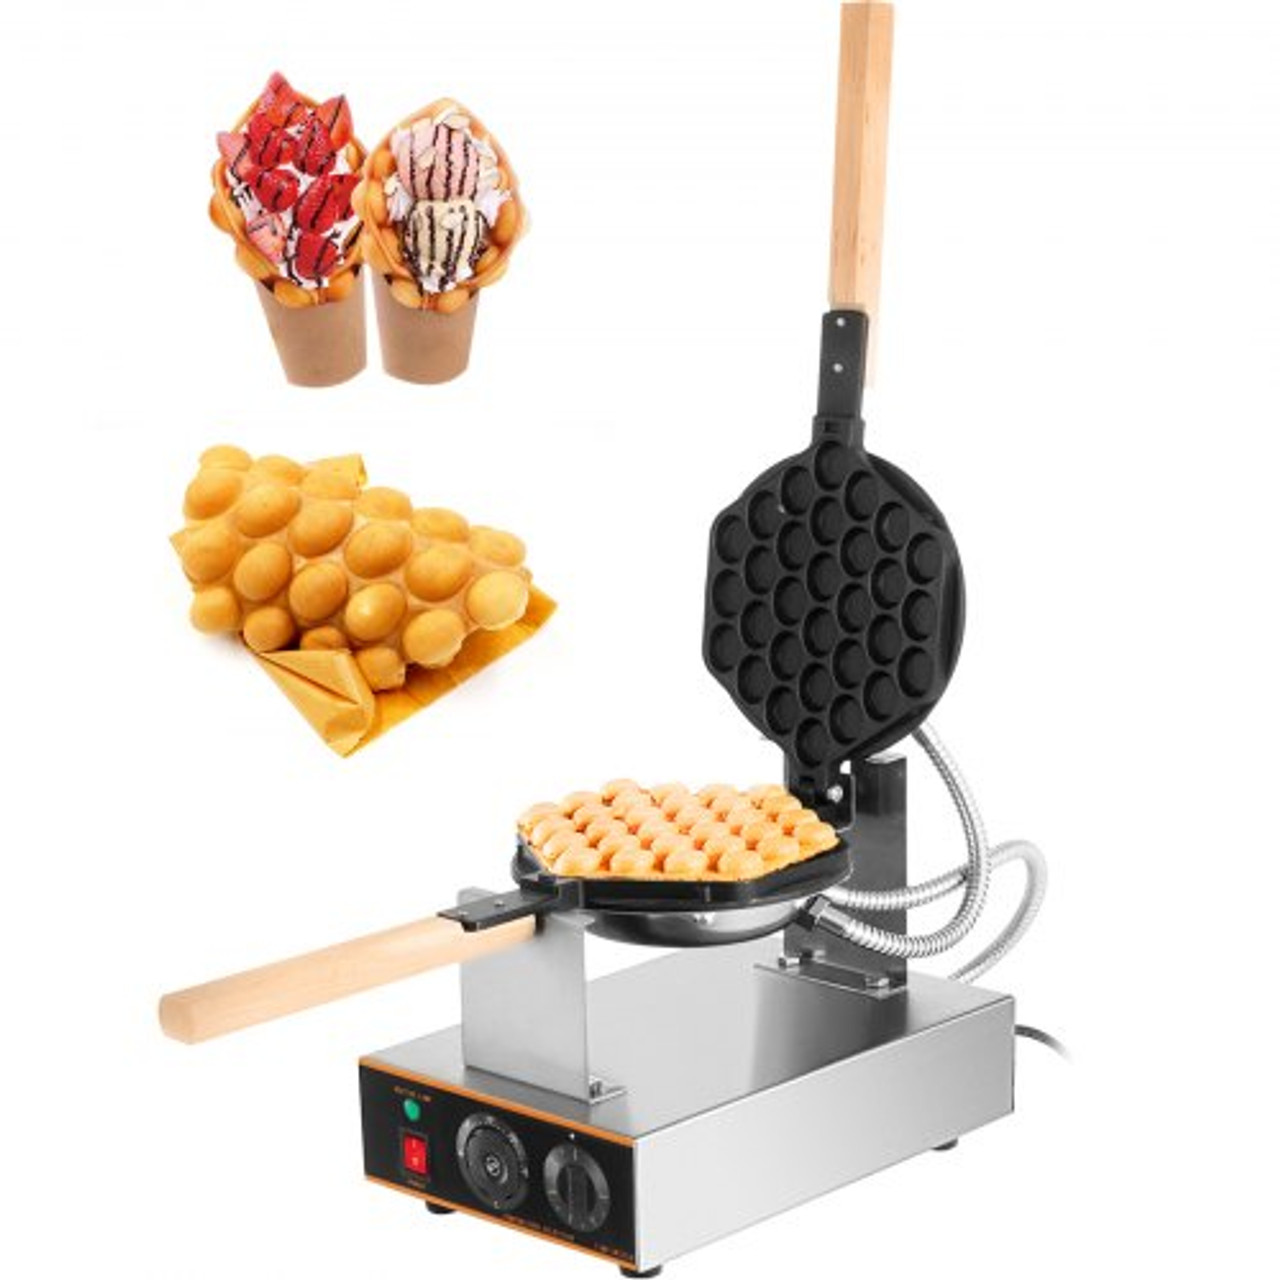 Commercial Bubble Waffle Maker, 1400W Egg Bubble Puff Iron w/ 180ø Rotatable 2 Pans & Wooden Handles, Stainless Steel Baker w/ Non-Stick Teflon Coating, 50-250?/122-482? Adjustable